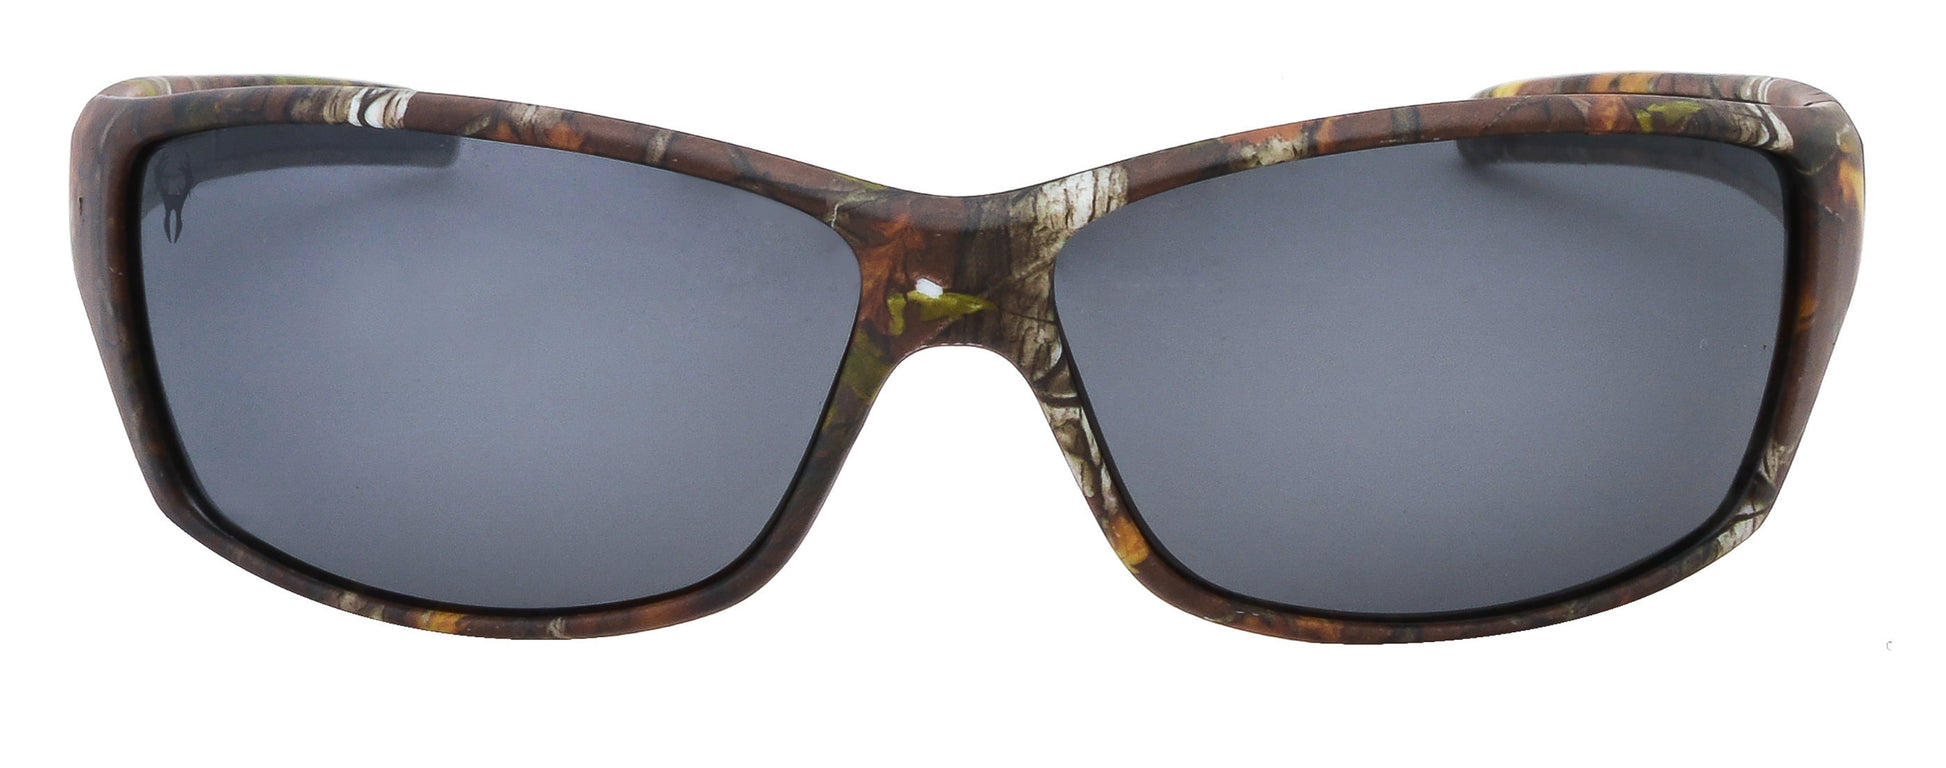 Third image: Hornz Brown Forest Camouflage Polarized Sunglasses for Men Full Frame & Free Matching Microfiber Pouch – Brown Camo Frame - Smoke Lens